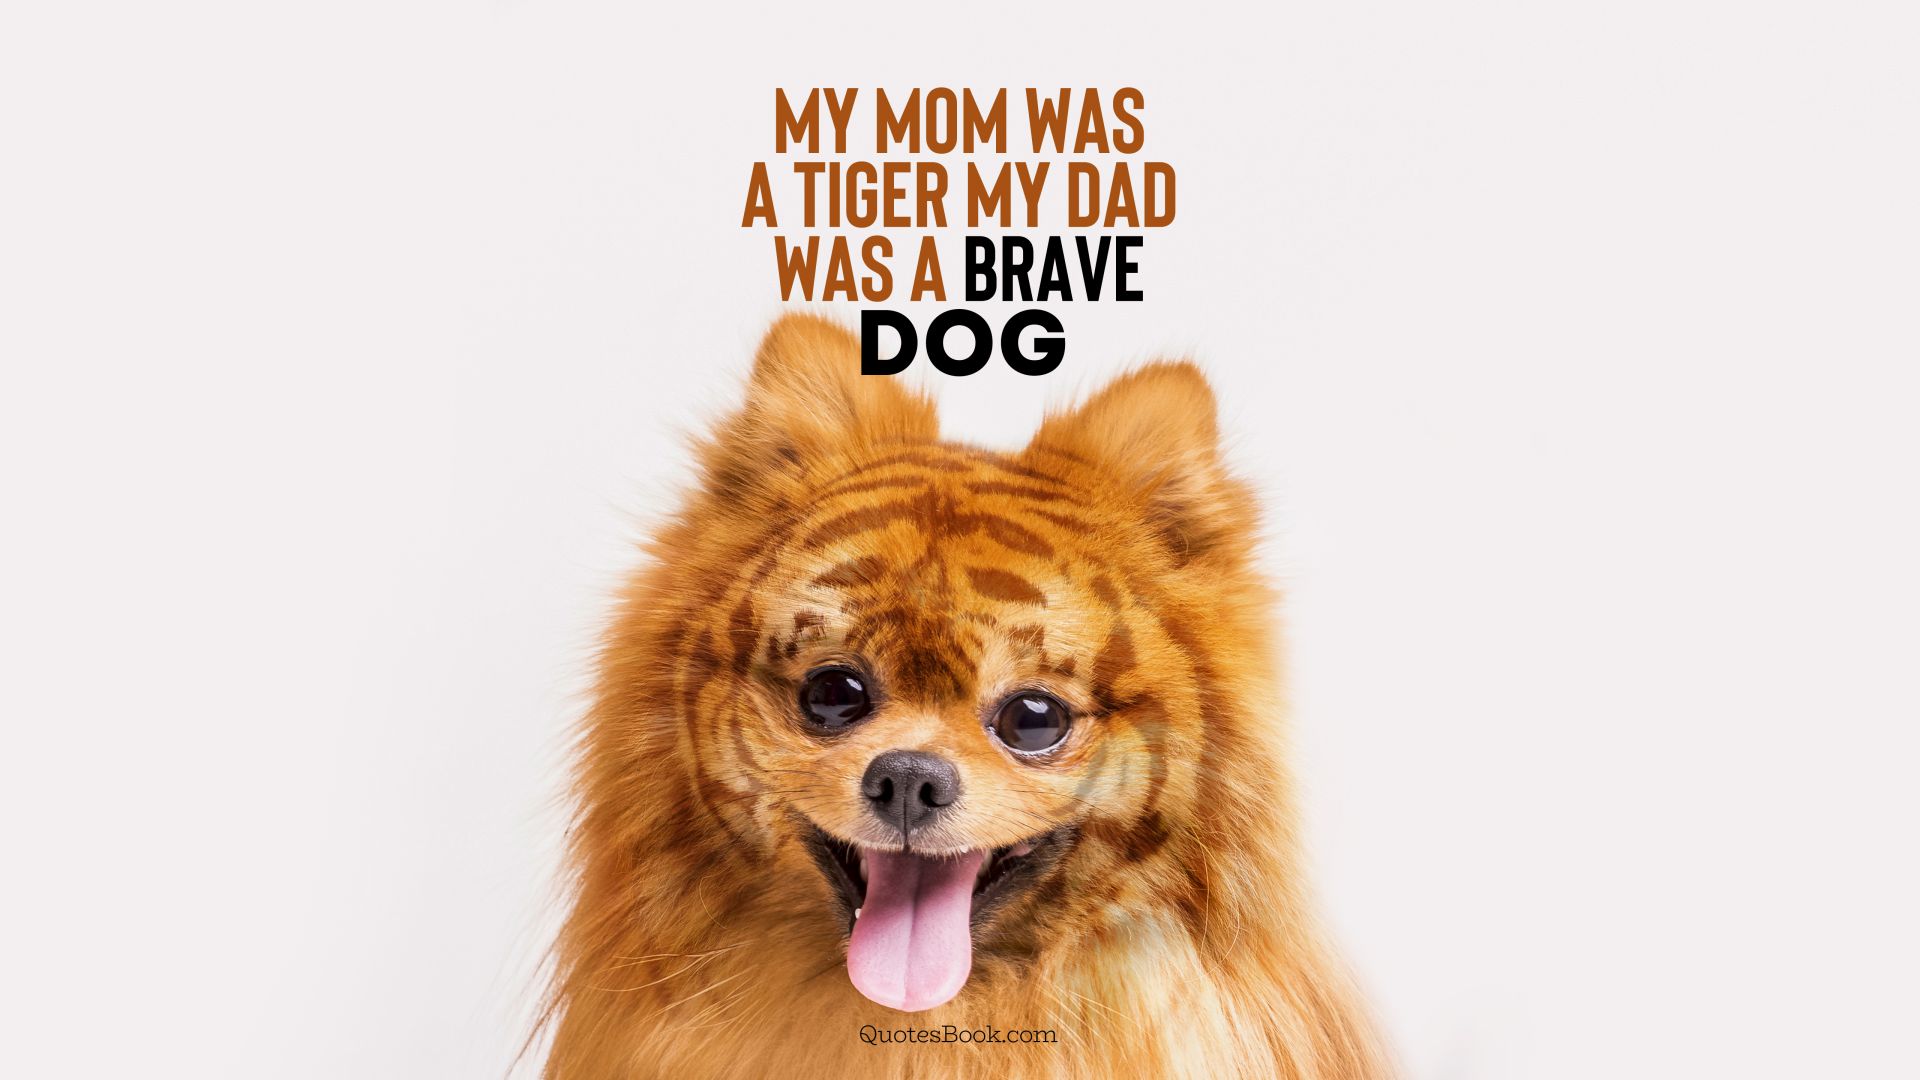 My mom was a tiger my dad was a brave dog - QuotesBook